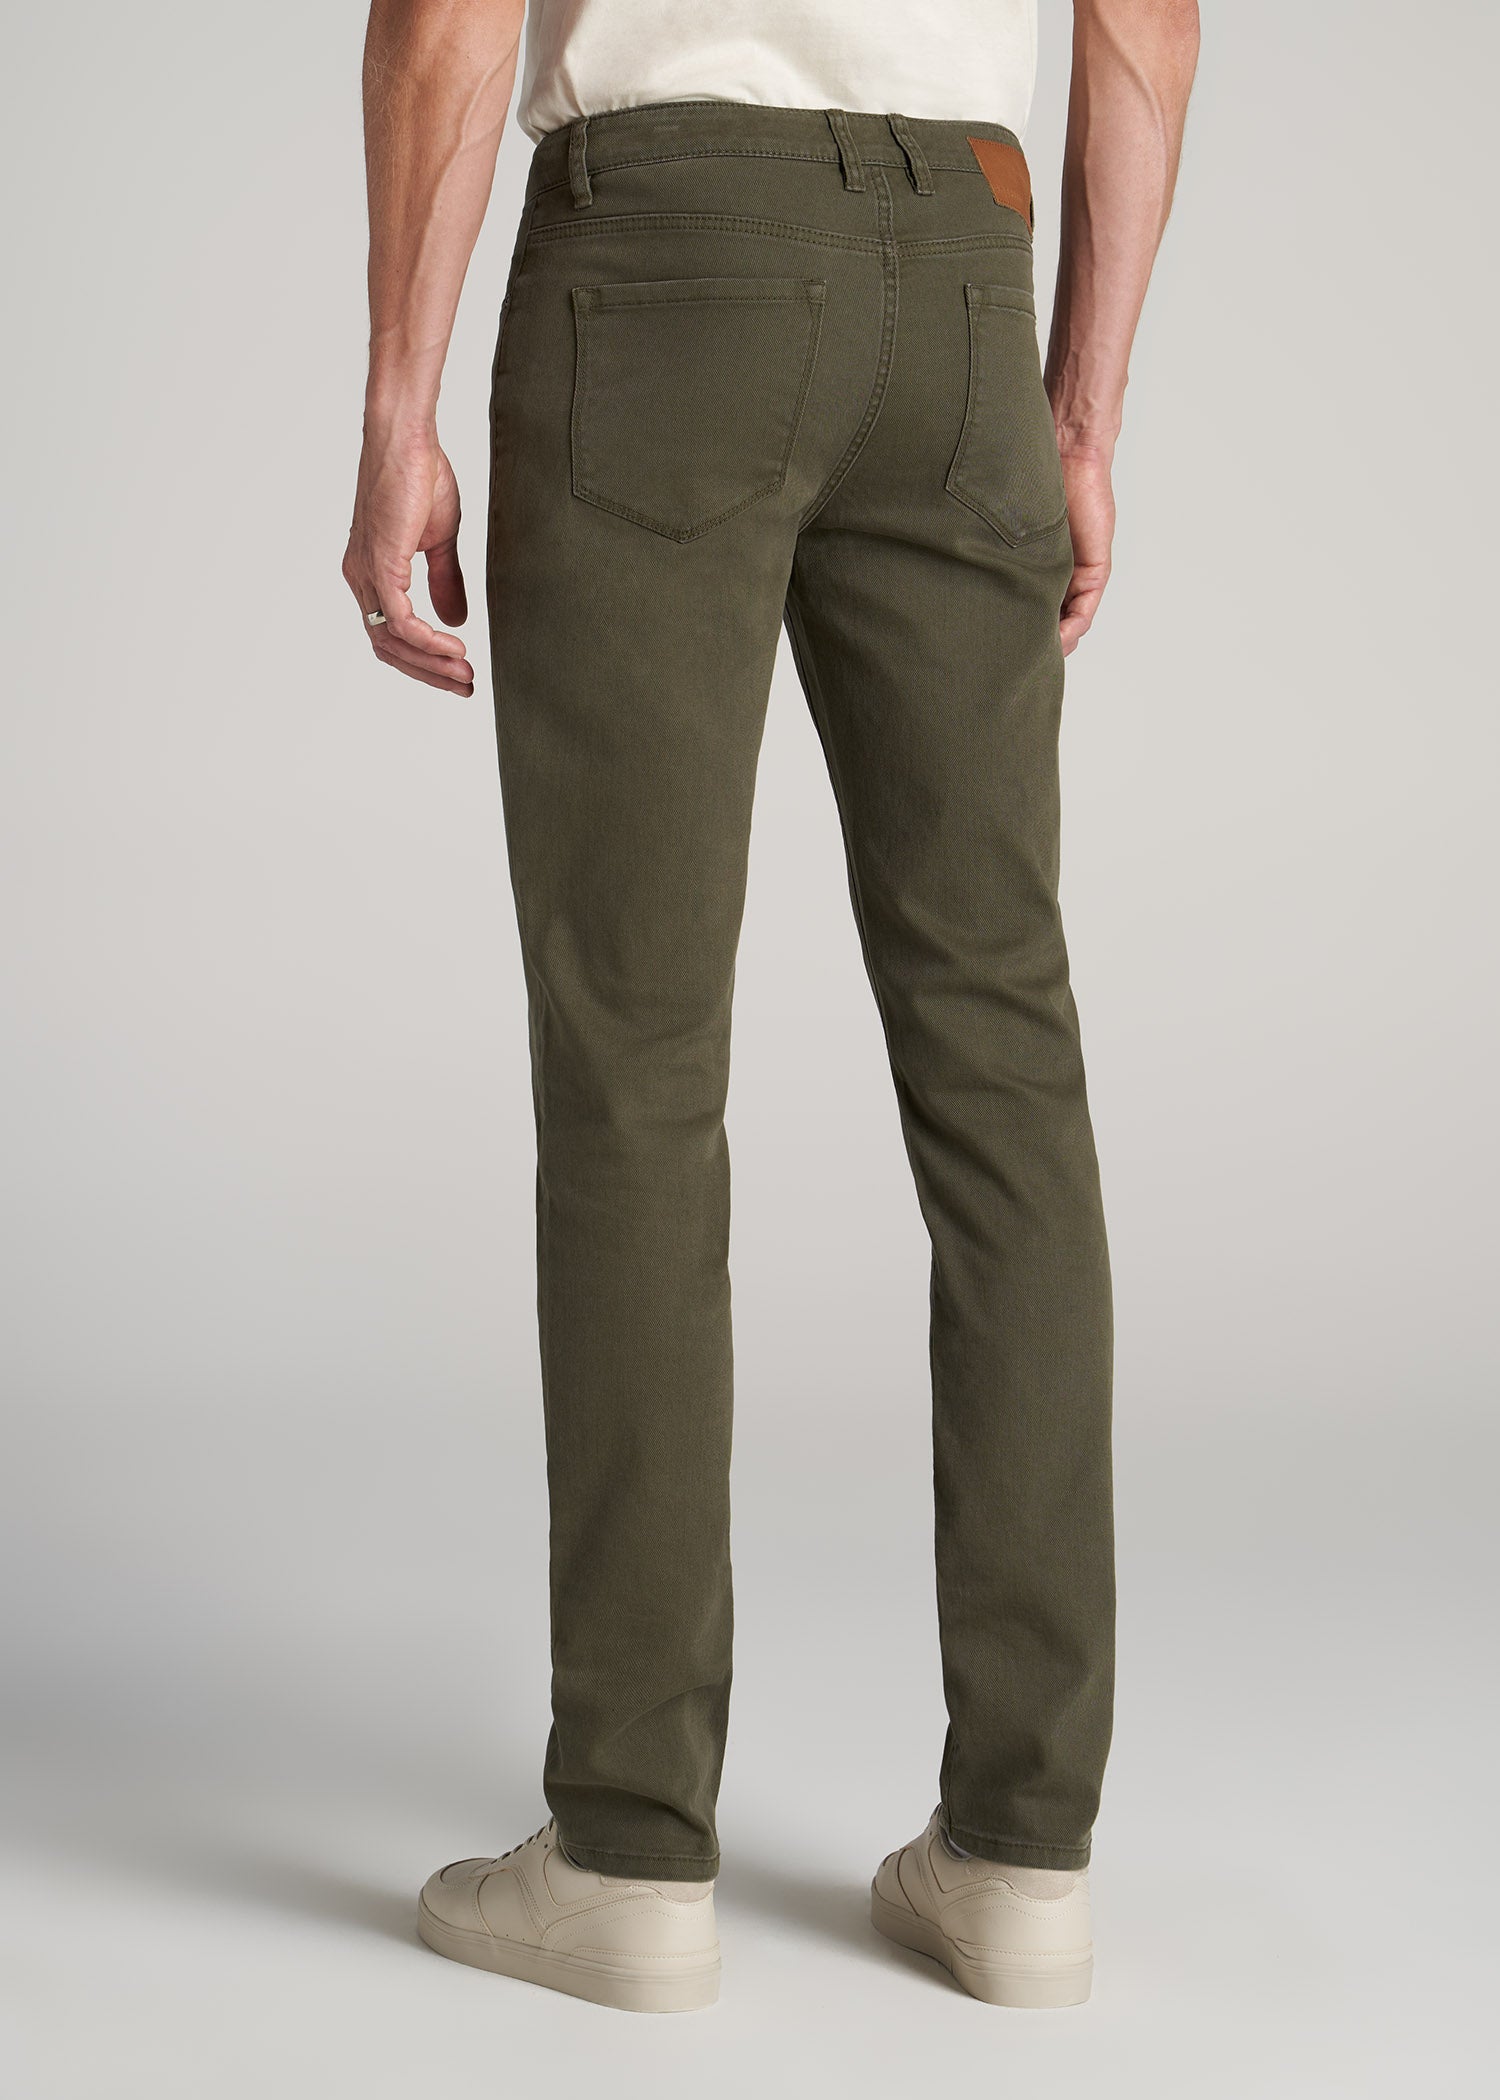 Keep It Casual Washed Pant Set - Olive